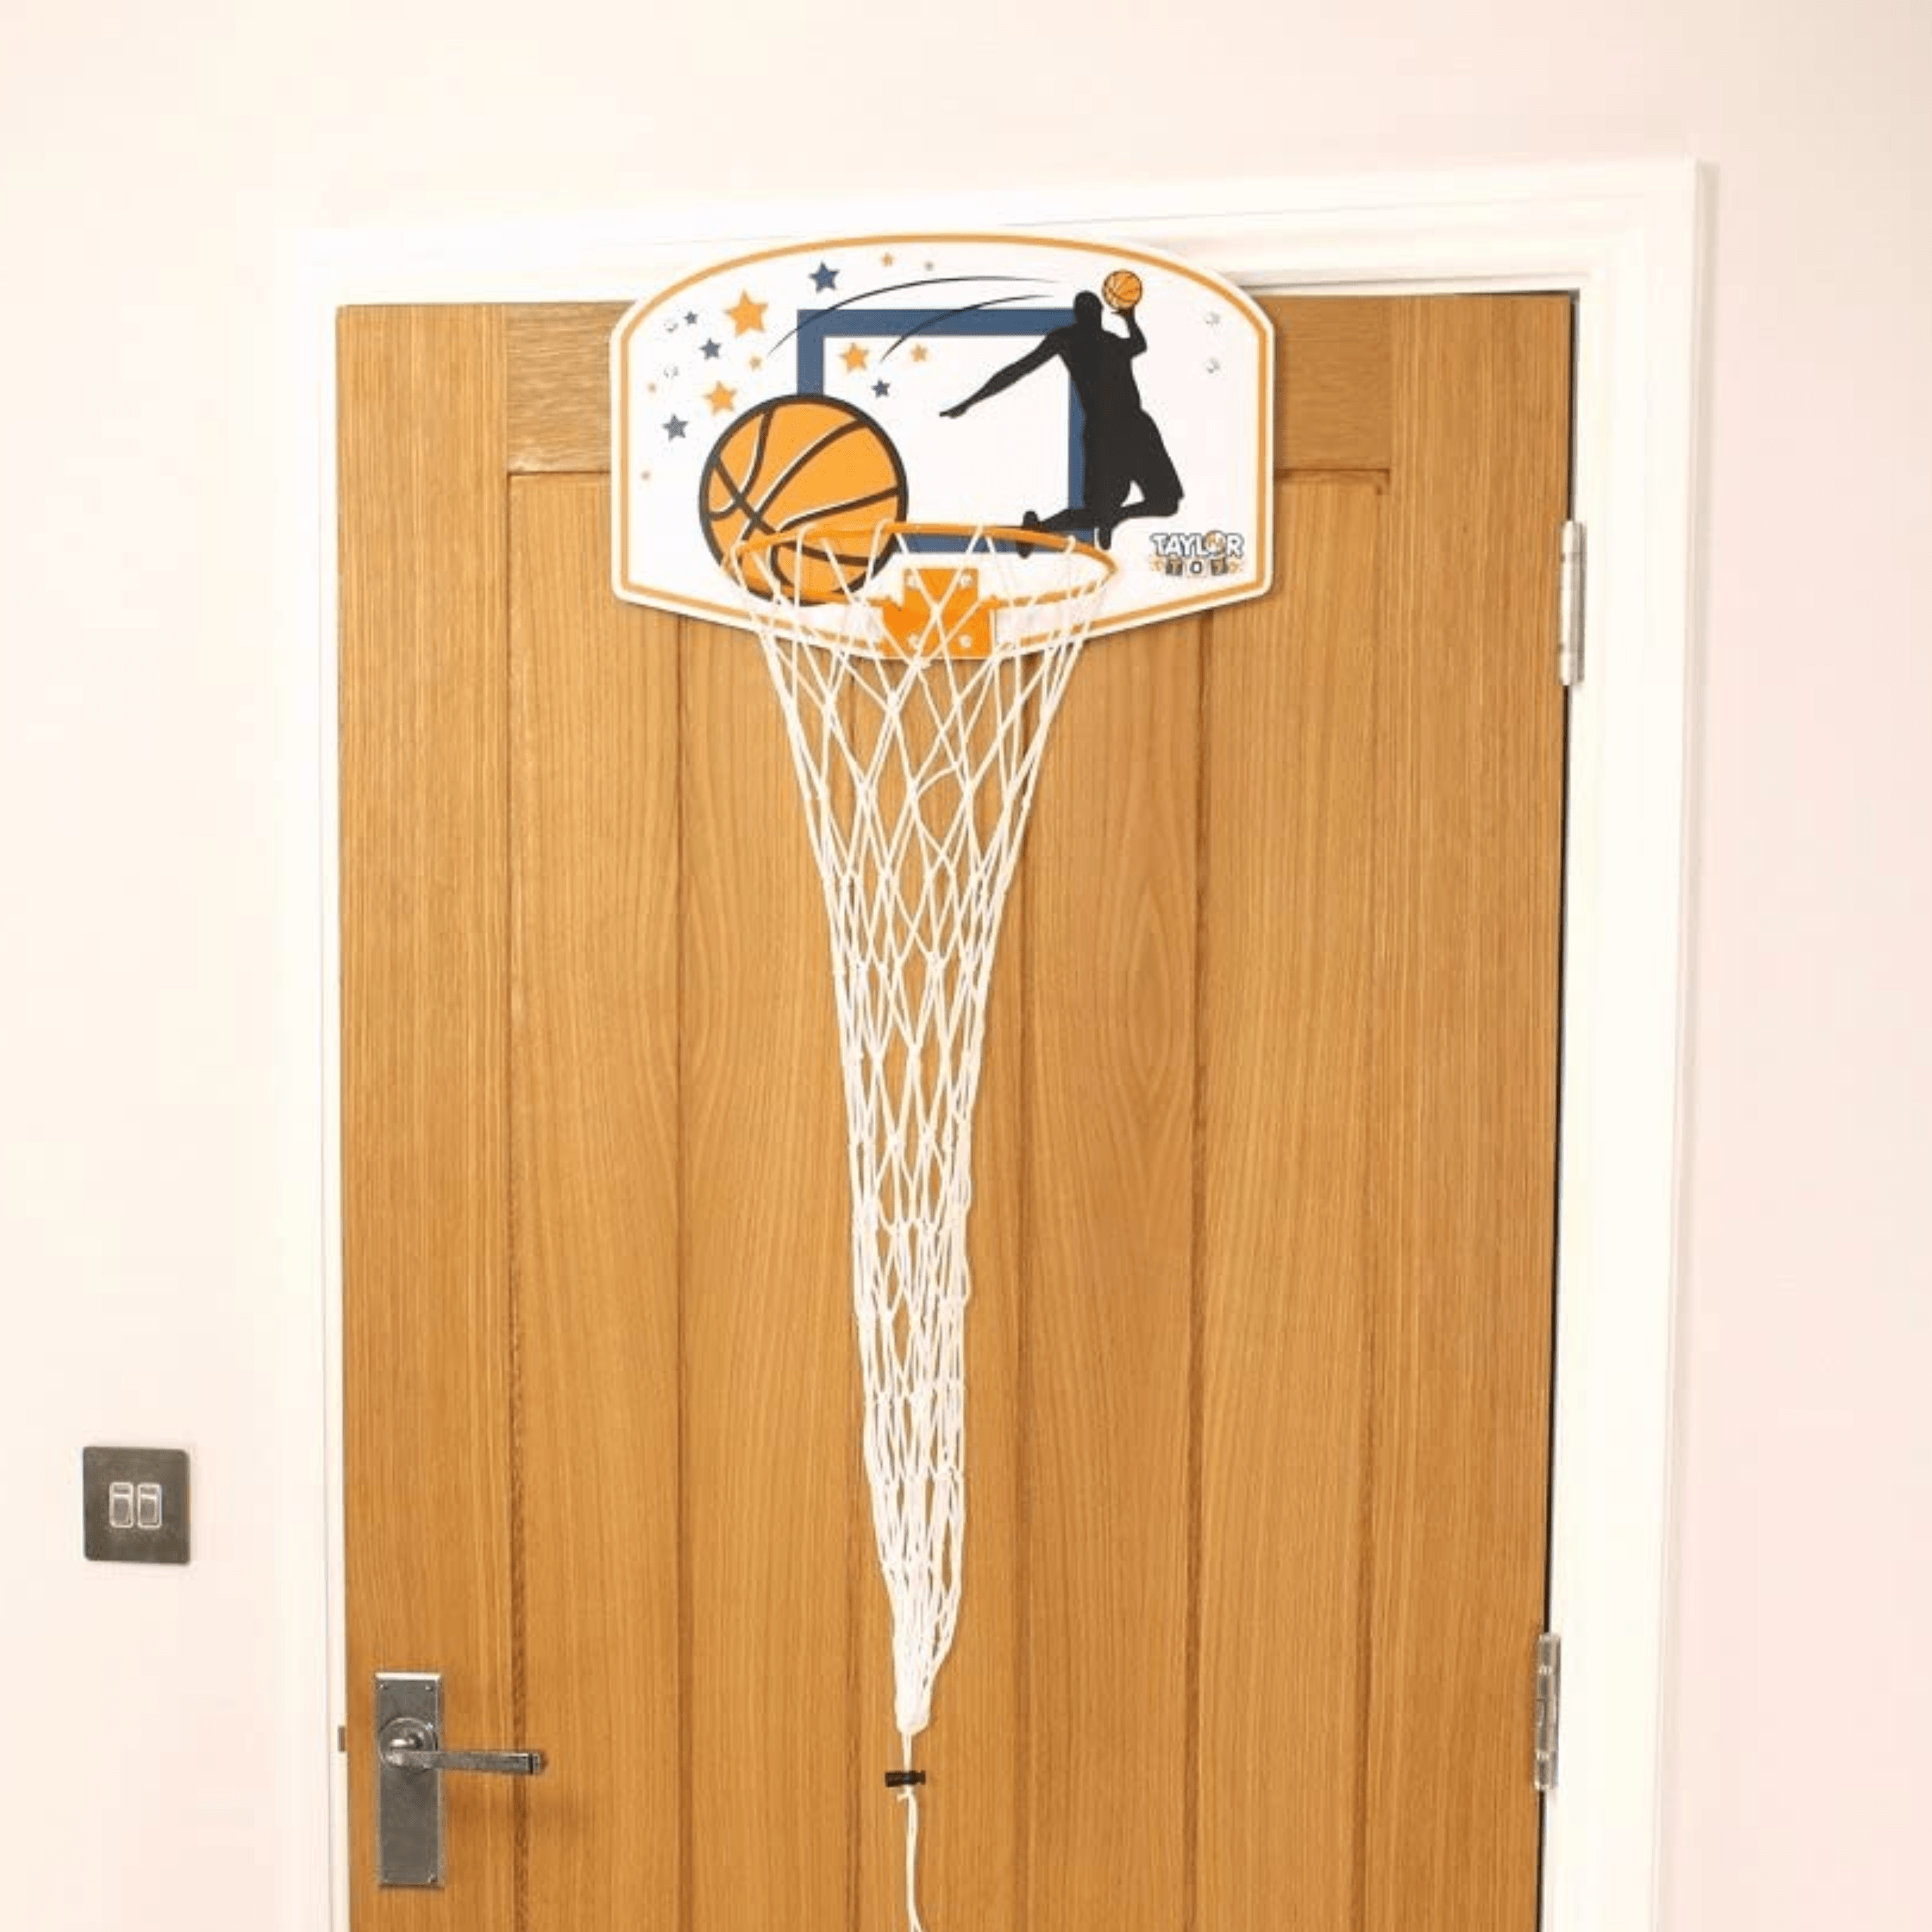 Taylor Toy Basketball Hoop Clothes Hamper - OrangeOnions Wholesale